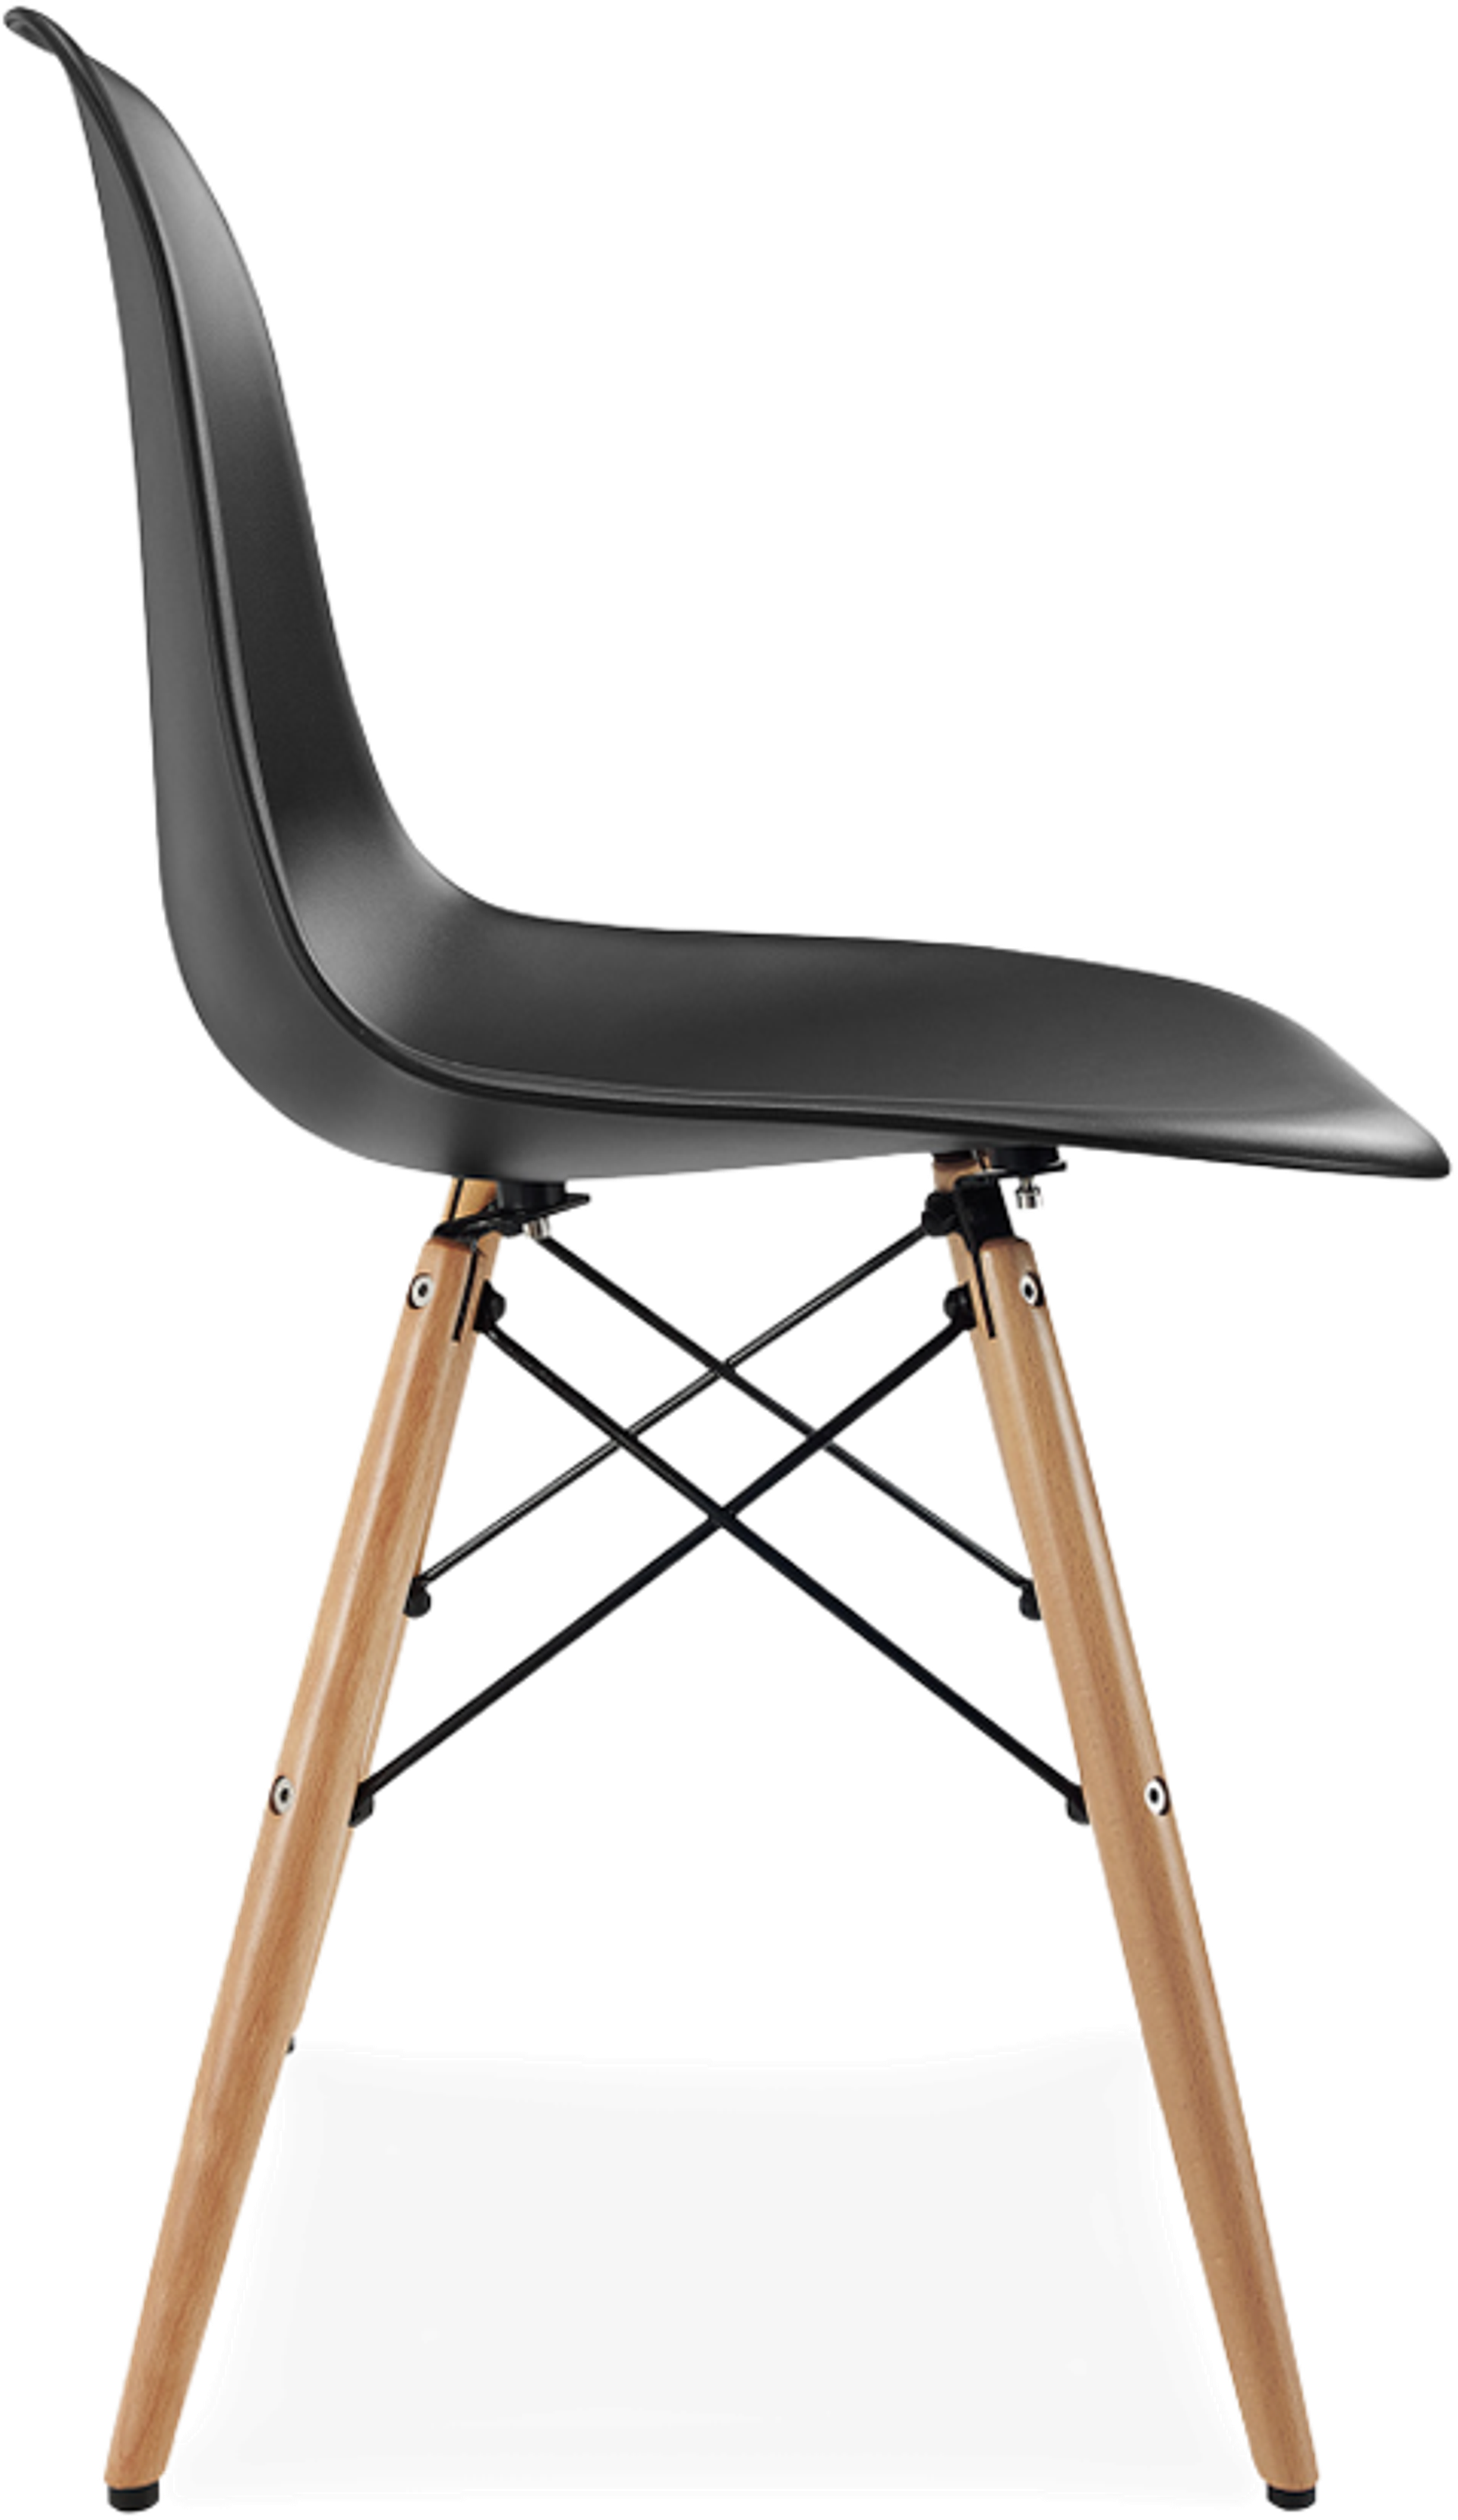 DSW Style Chair Black/Light Wood image.